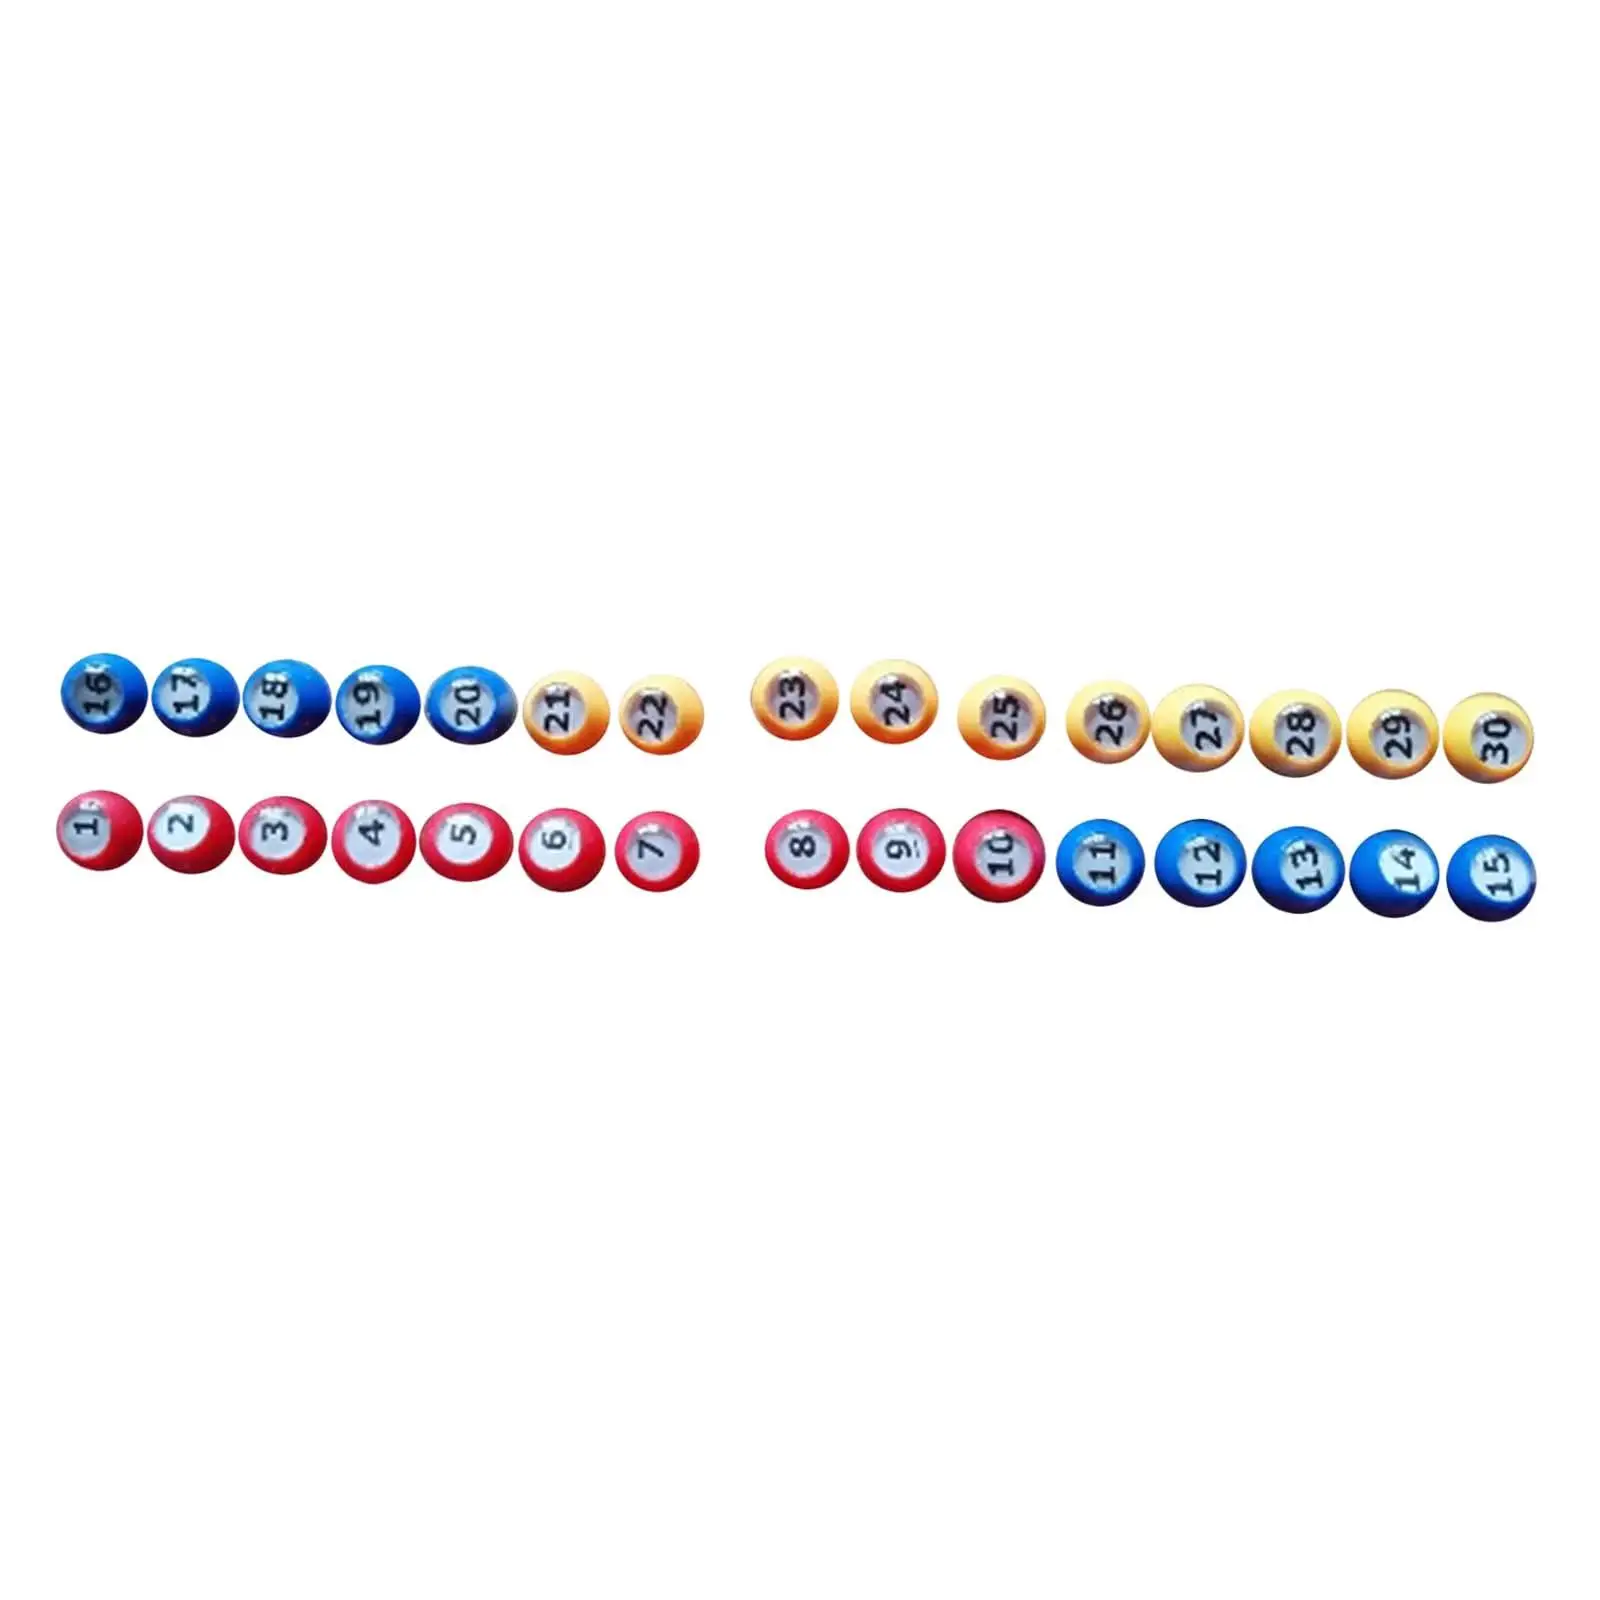 30x Bingo Ball Fitments Replacement Parts Durable Universal 1-30 Numbers for